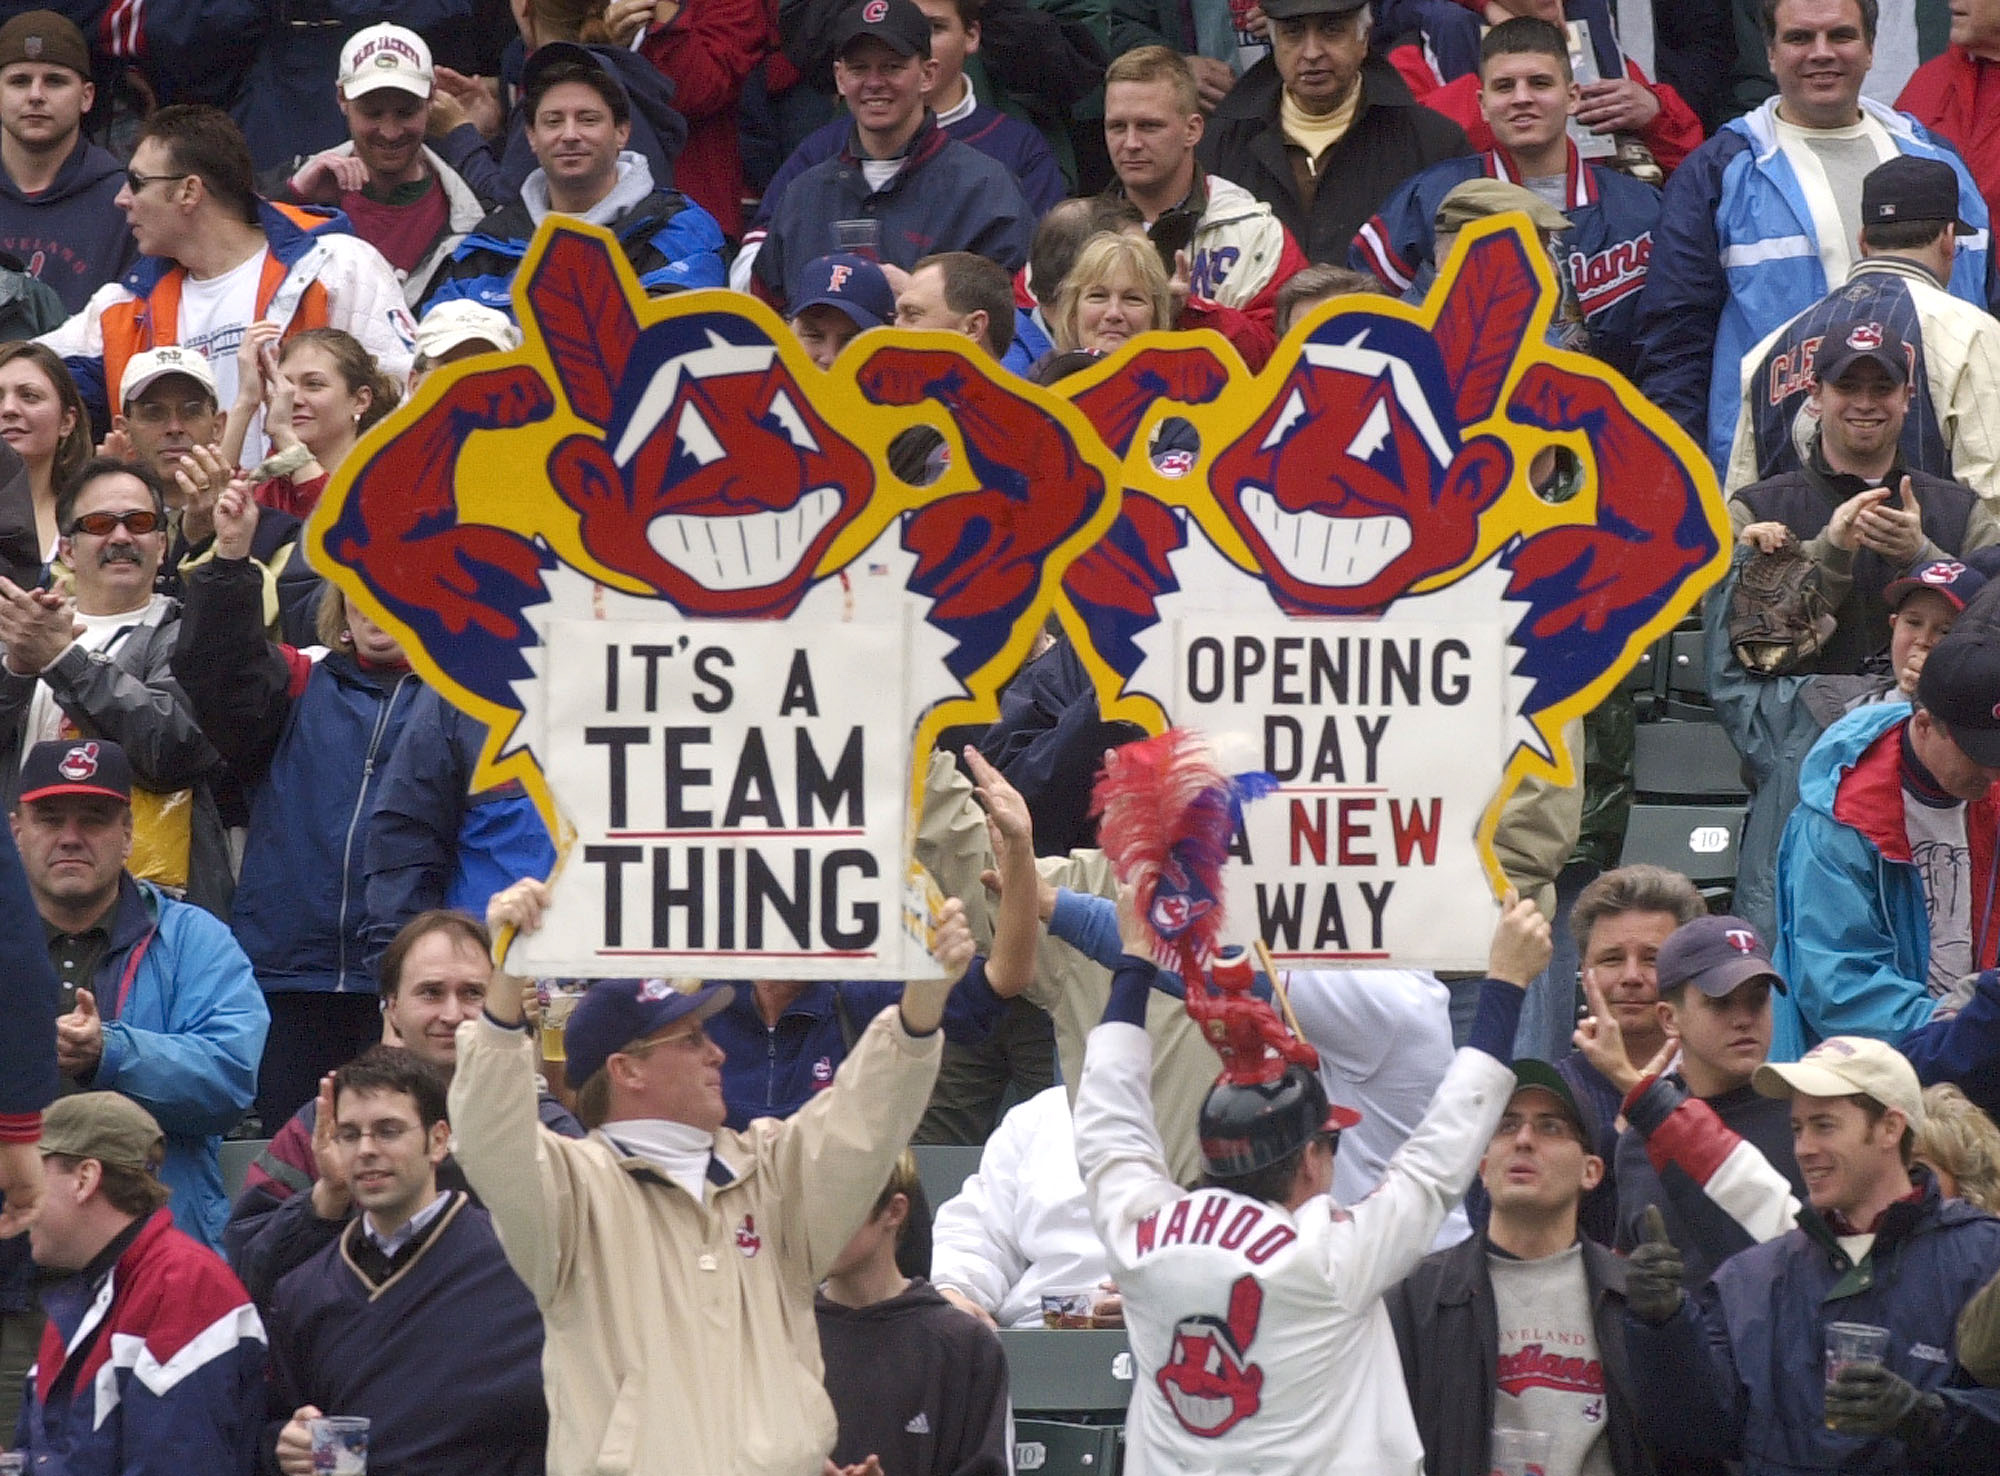 From 2002: Cleveland Indians fans hold up signs with Chief Wahoo on them. (AP)